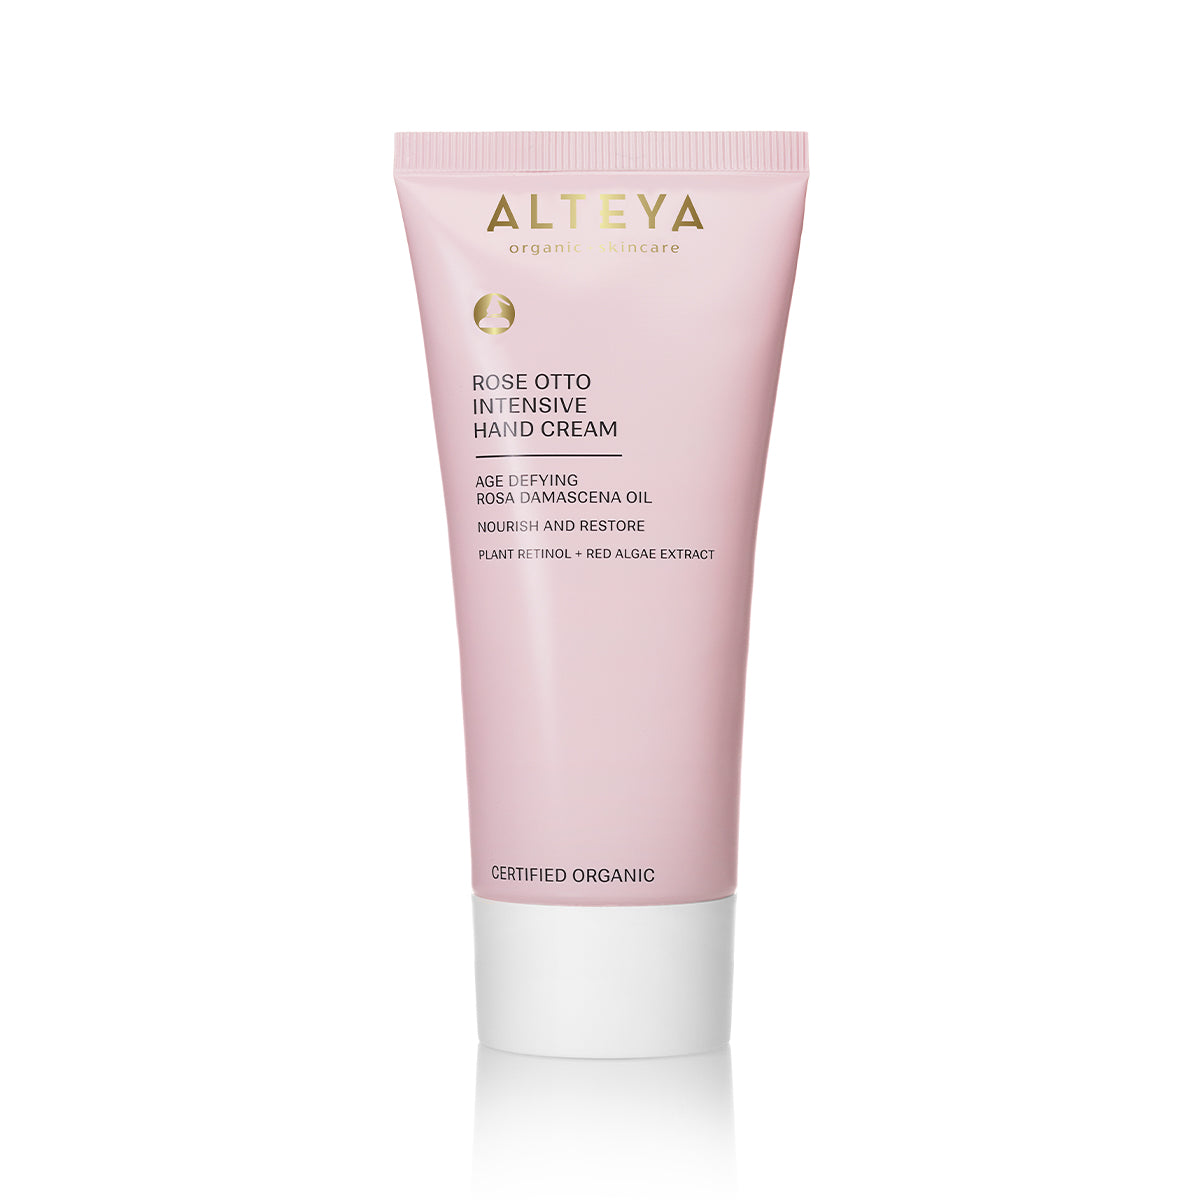 Alteya Organics' Organic Rose Otto Intensive Hand Cream is a hand cream with a pink tube. It features an organic formula, enriched with the luxurious Bulgarian Rose Otto, renowned for its rejuvenating properties.